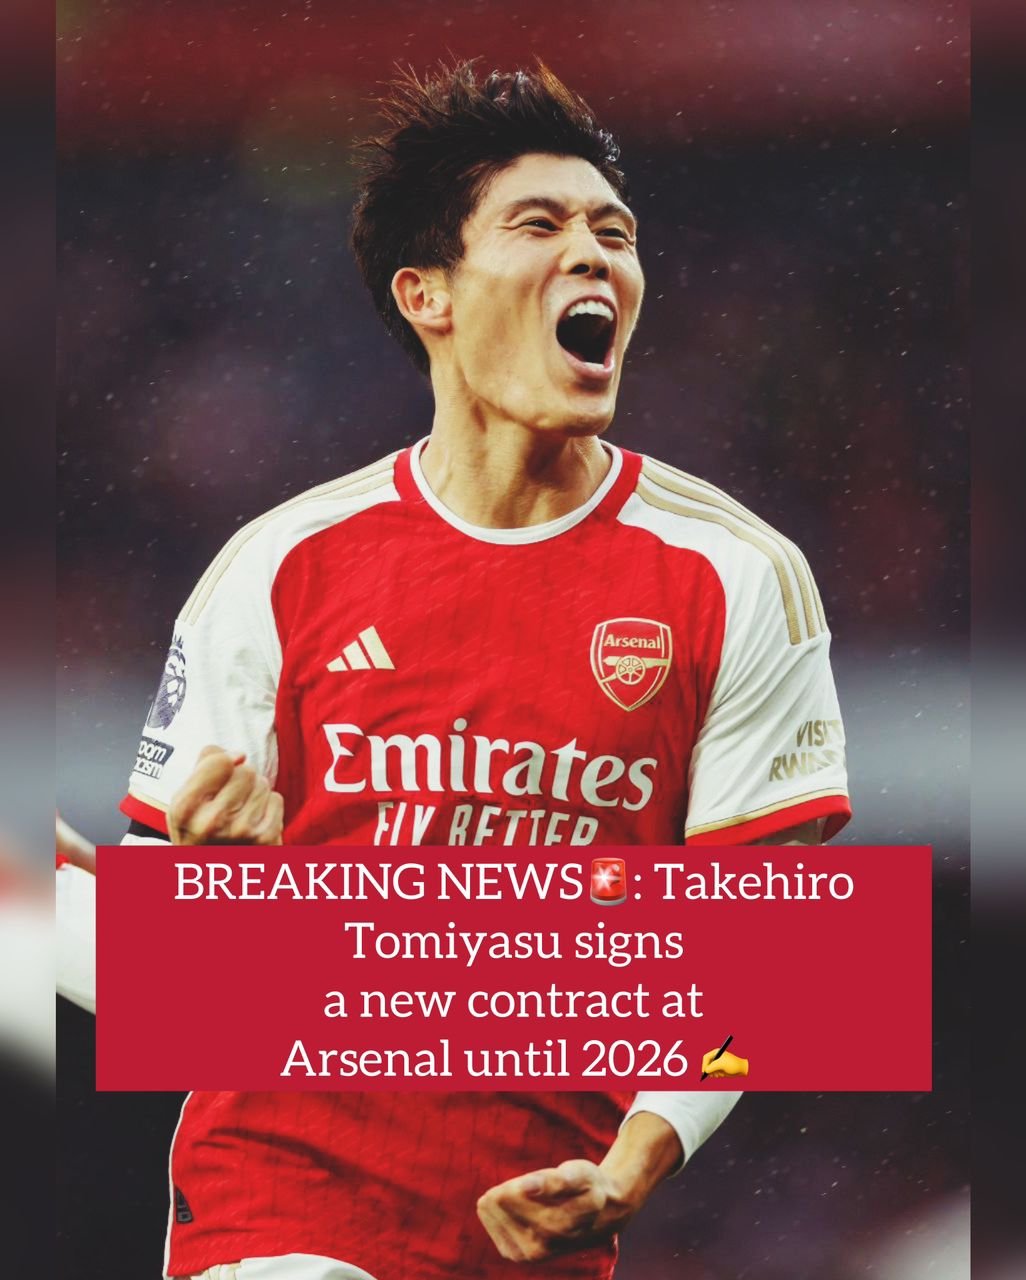 Breaking News: Arsenal 25-year-old defender Takehiro Tomiyasu officially signs new long-term contract